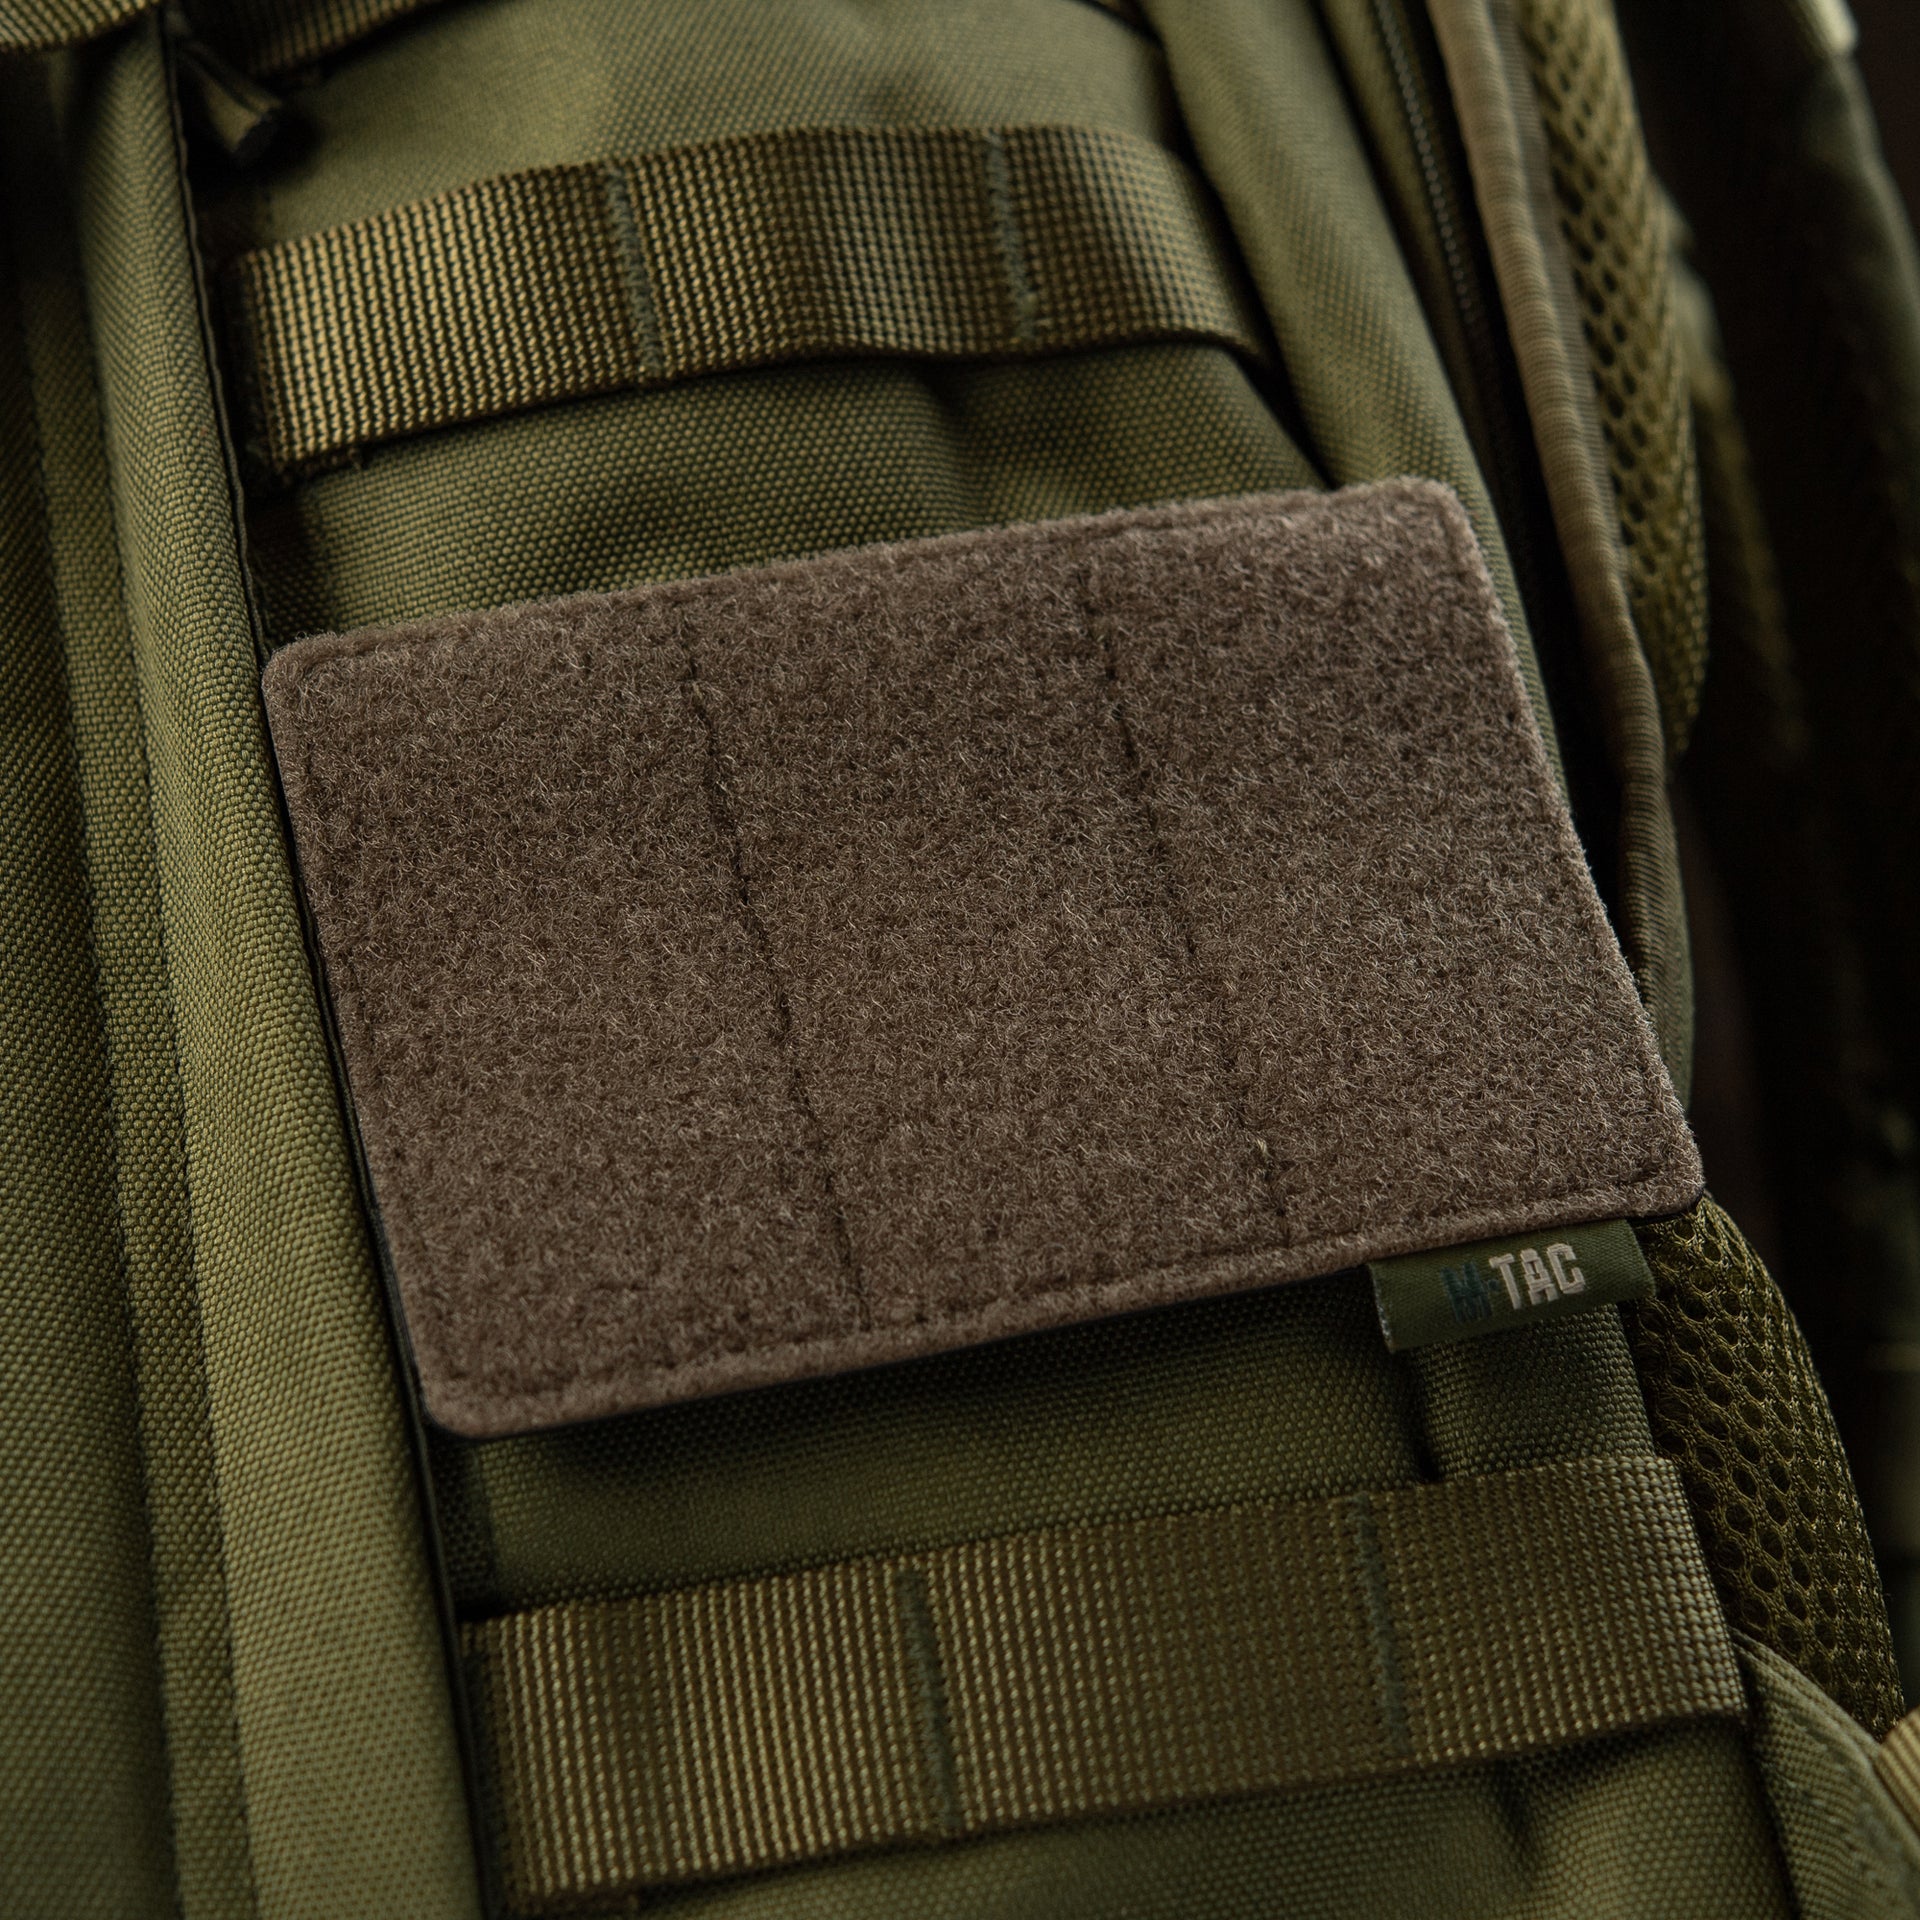 M-Tac Tactical Morale Patches Hook and Loop Display Board Molle 4.5 x 3.5 inches